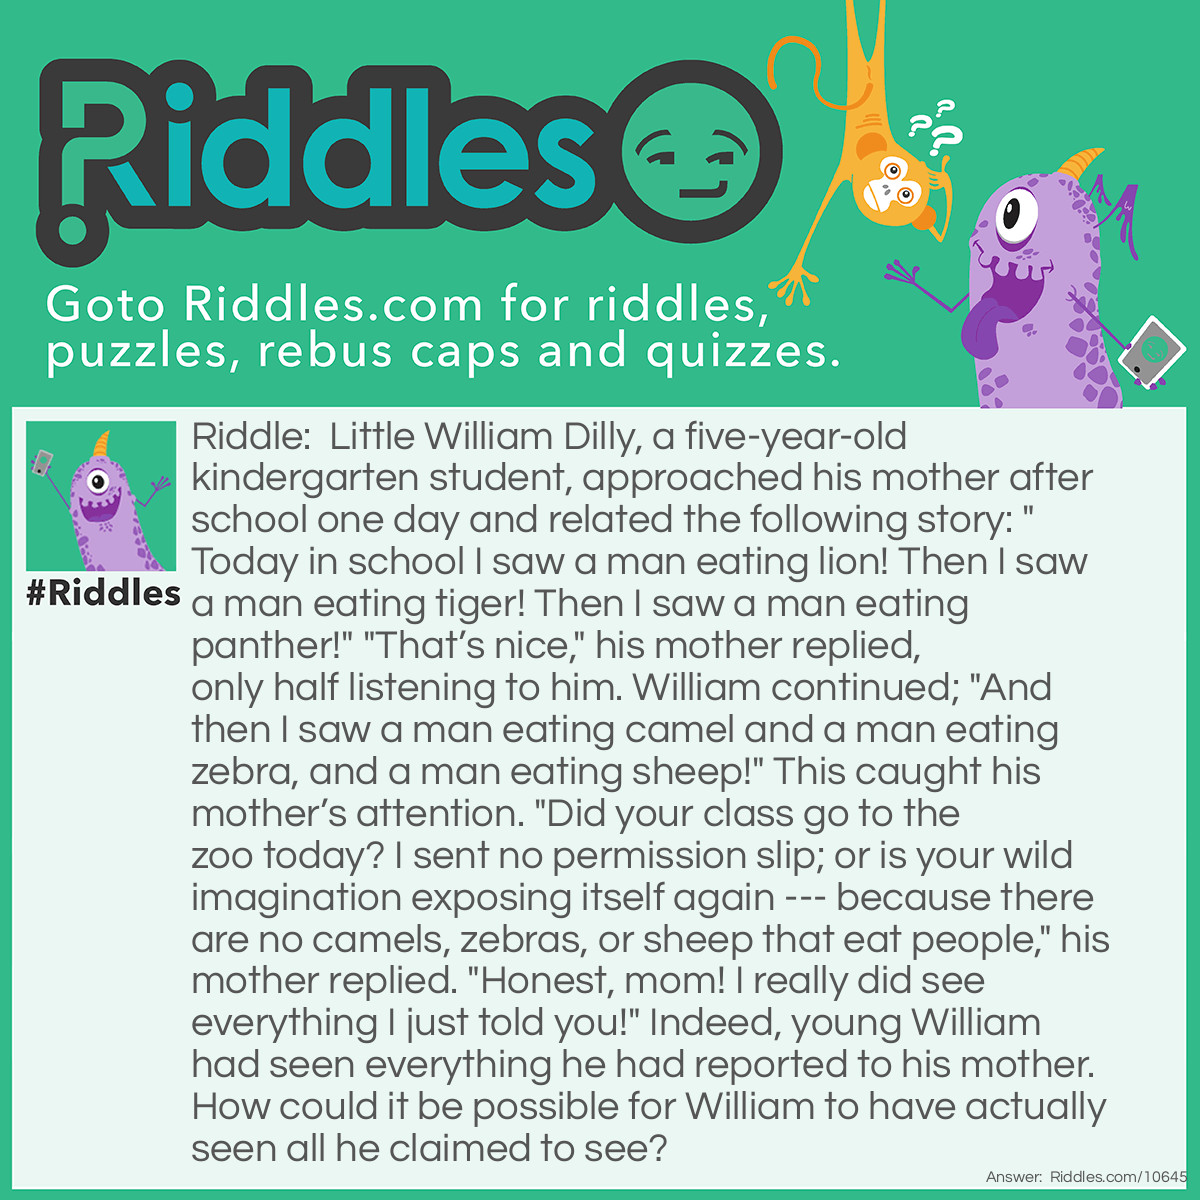 Riddle: Little William Dilly, a five-year-old <a href="https://www.riddles.com/post/71/riddles-for-kindergartners">kindergarten</a> student, approached his mother after school one day and related the following story: "Today in school I saw a man-eating lion! Then I saw a man-eating tiger! Then I saw a man-eating panther!" "That’s nice," his mother replied, only half listening to him. William continued; "And then I saw a man-eating camel and a man-eating zebra, and a man-eating sheep!" This caught his mother’s attention. "Did your class go to the zoo today? I sent no permission slip; or is your wild imagination exposing itself again --- because there are no camels, zebras, or sheep that eat people," his mother replied. "Honest, mom! I really did see everything I just told you!" Indeed, young William had seen everything he had reported to his mother. How could it be possible for William to have actually seen all he claimed to see? Answer: Little William’s kindergarten teacher was a man who enjoyed having fun with his students. At lunchtime that day, he took out a box of animal crackers, and holding up one animal at a time he would announce to the class, “You are now seeing a man eating lion, or a man eating sheep,” etc., and then proceed to eat each cracker, much to the children’s amusement. Little William was just reporting what he had seen his teacher doing and saying that day.